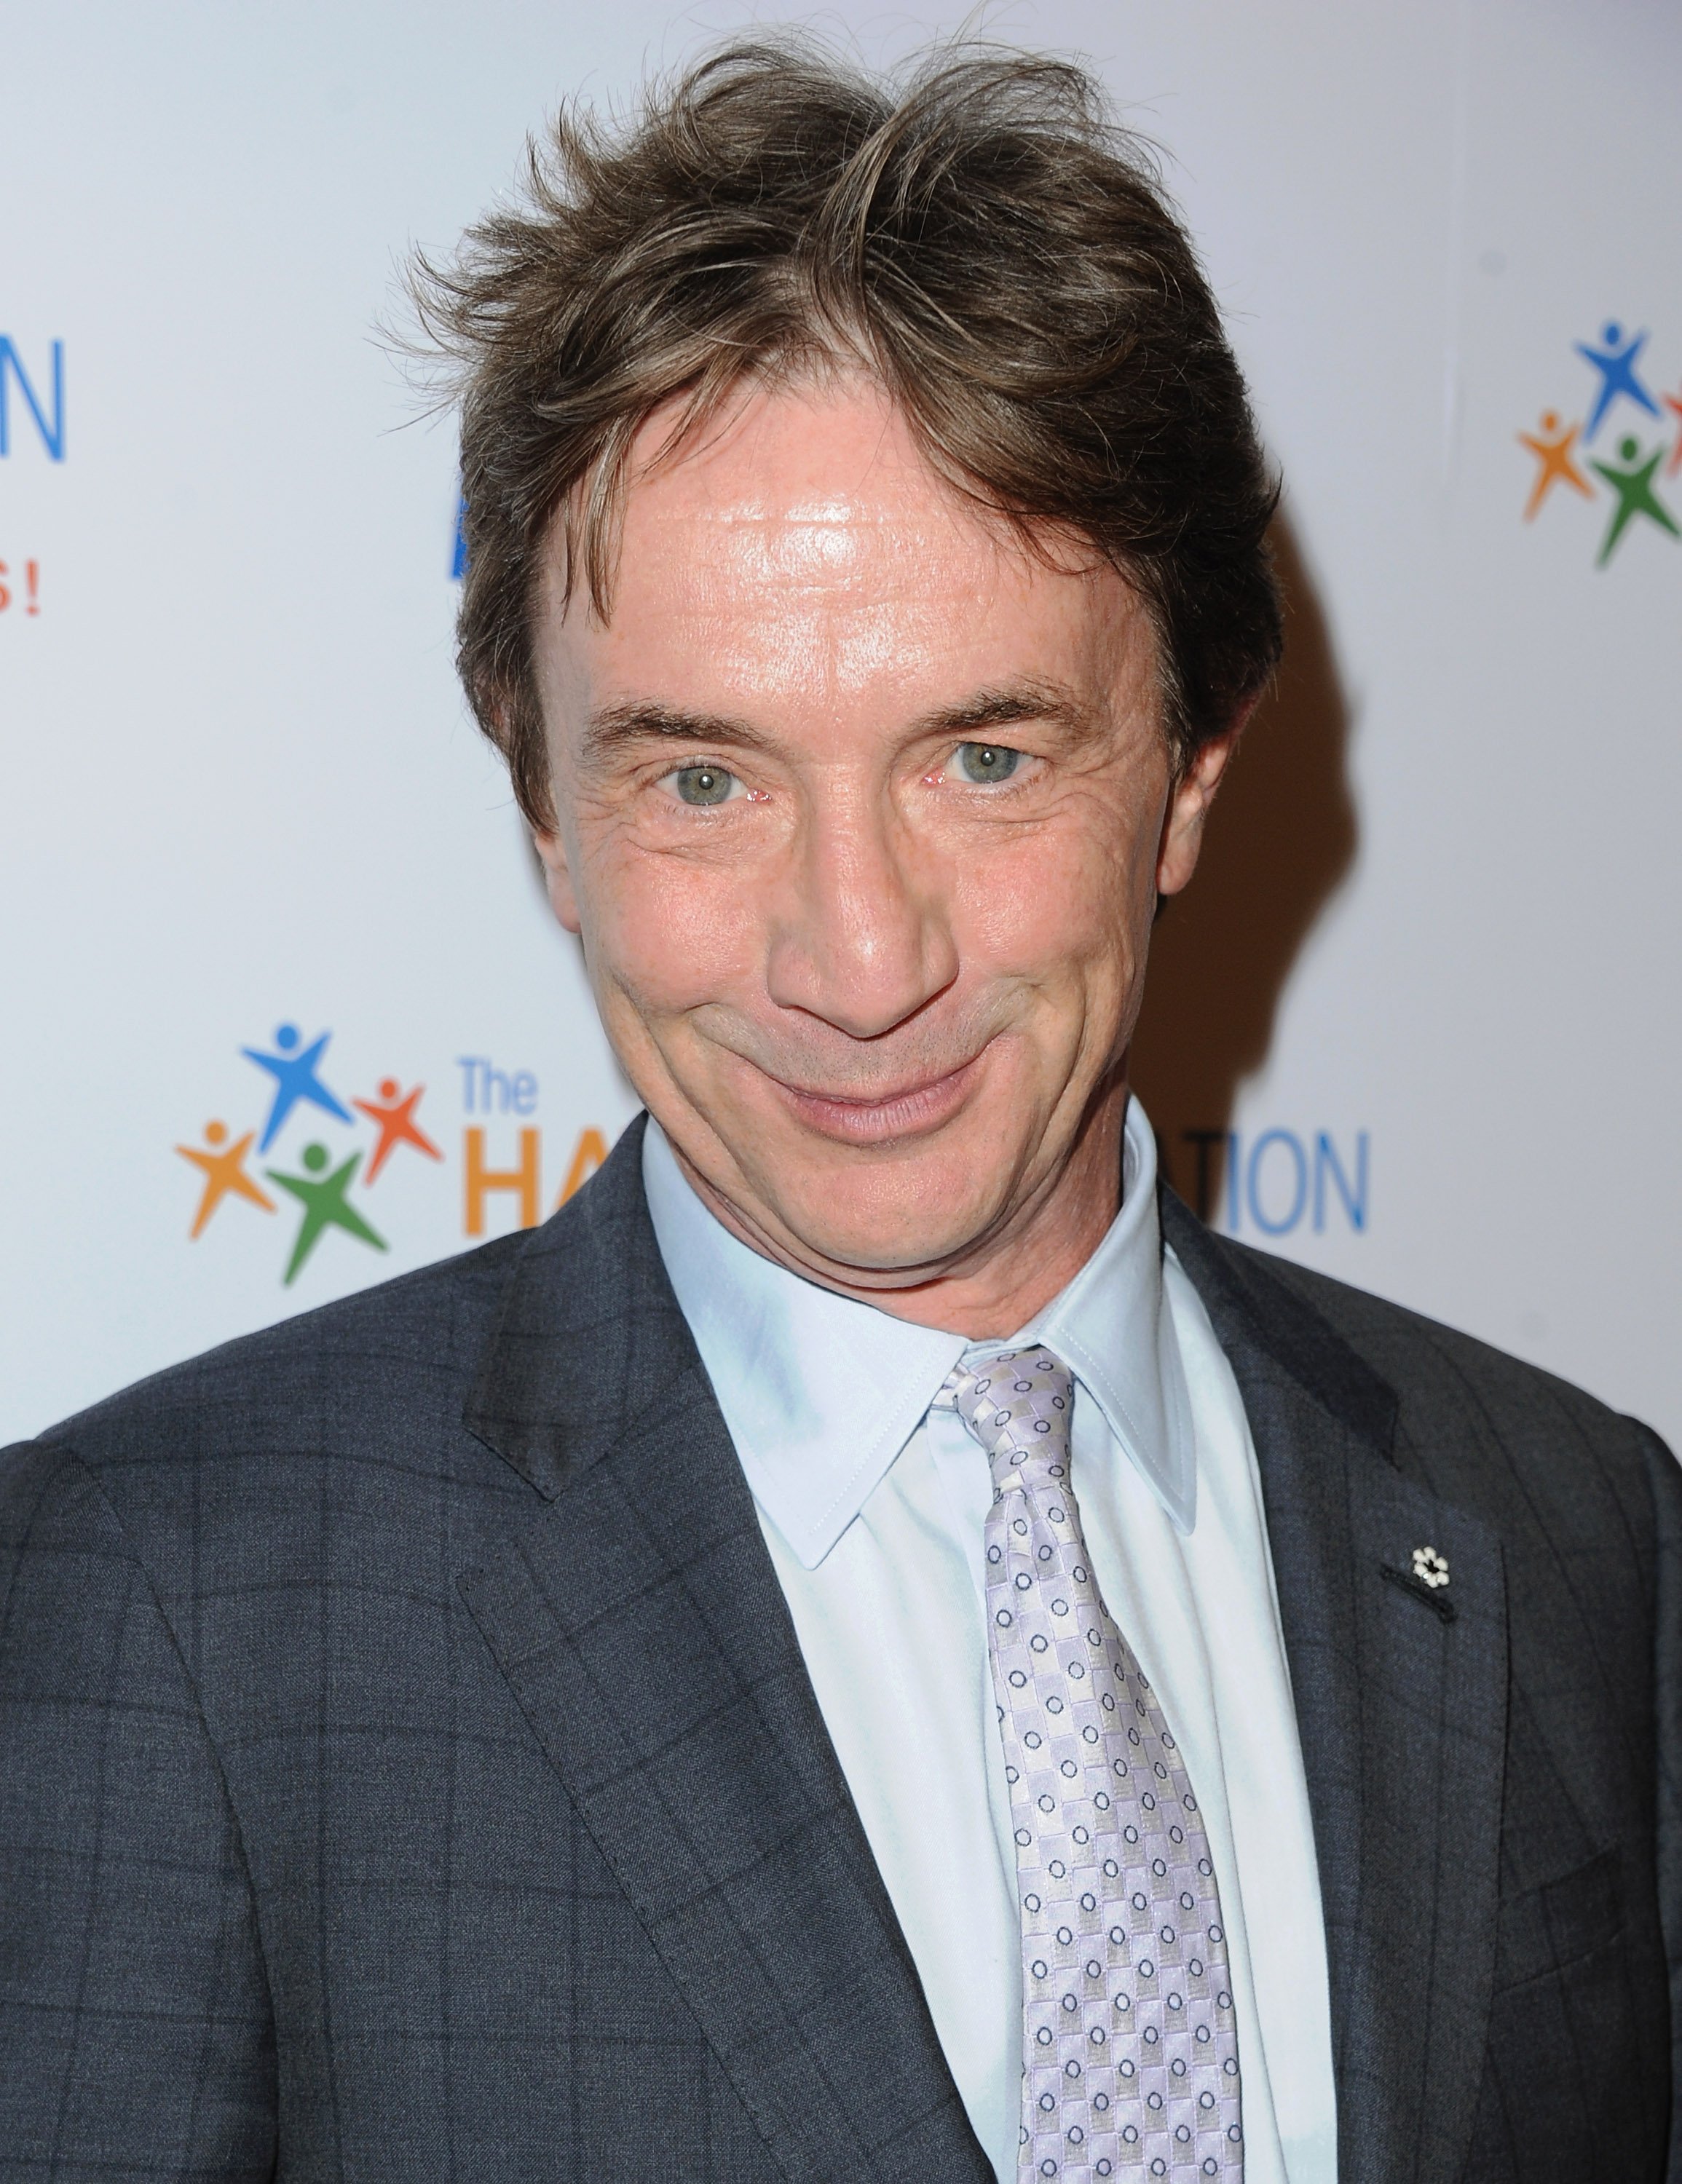 Actor Martin Short arrives at Goldie Hawn's Inaugural "Love In For Kids" Benefiting The Hawn Foundation's MindUp Program at Ron Burkle's Green Acres Estate on November 21, 2014 in Beverly Hills, California | Source: Getty Images